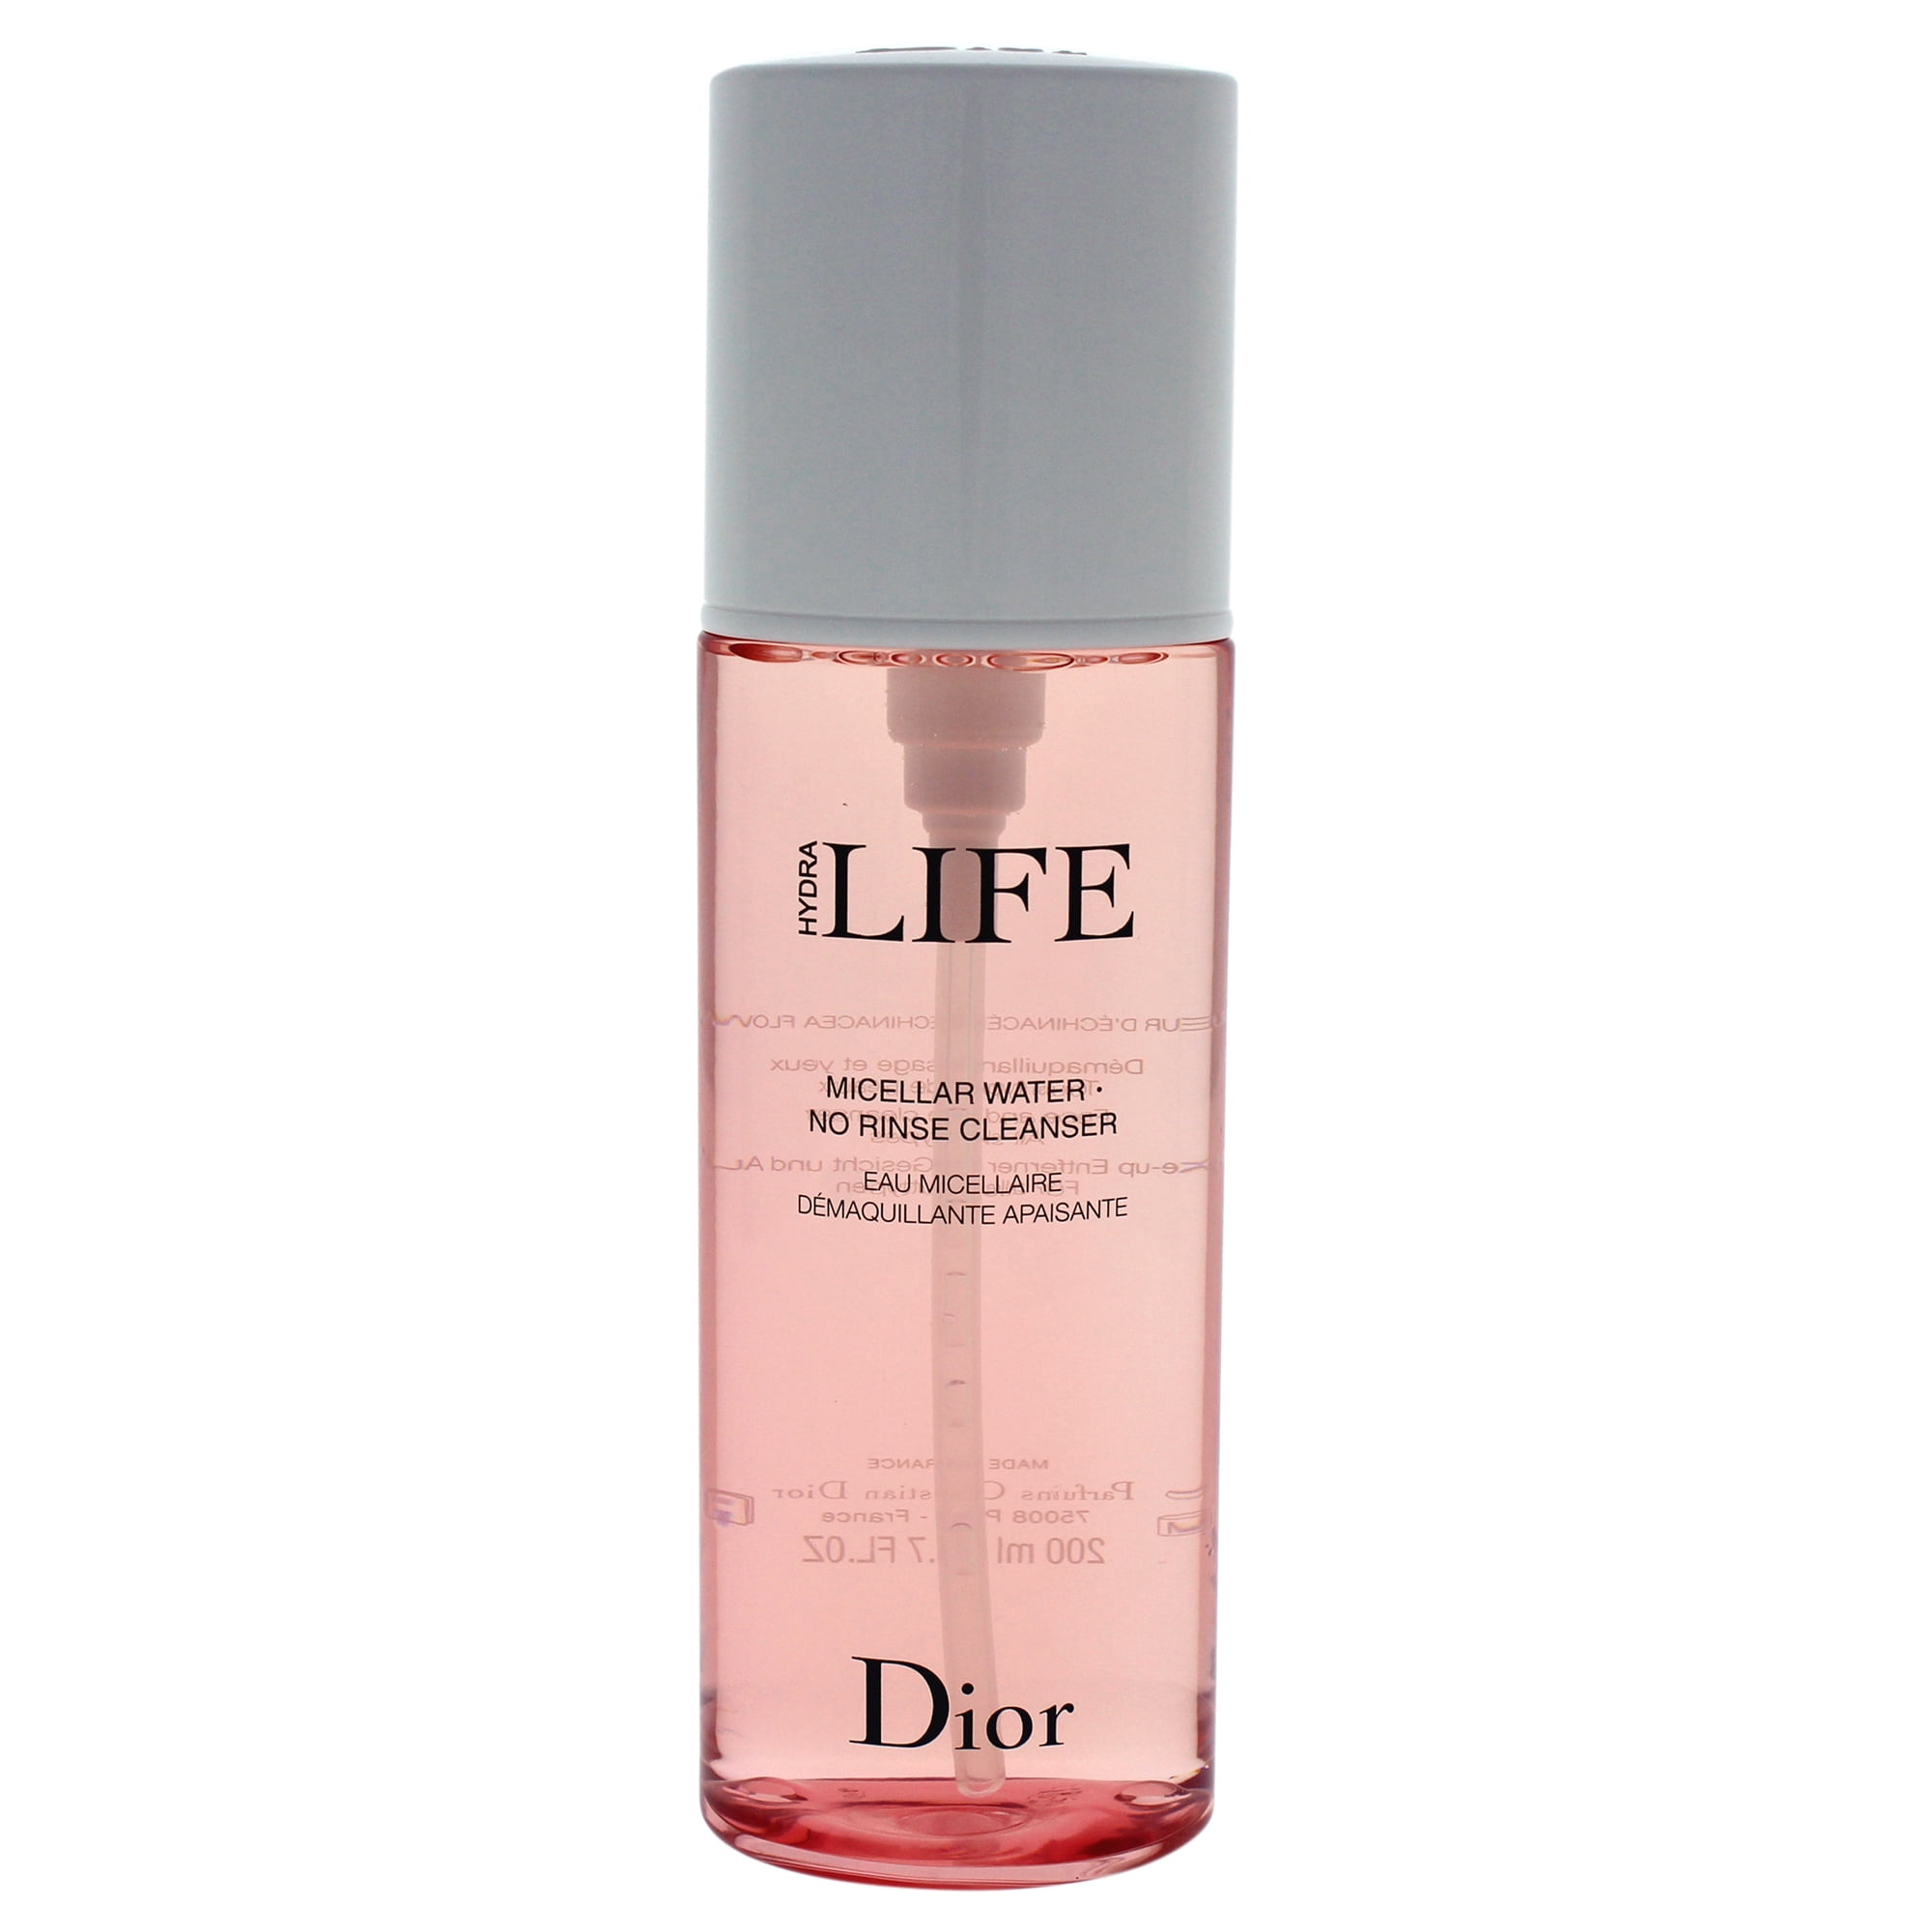 dior micellar water no rinse cleanser